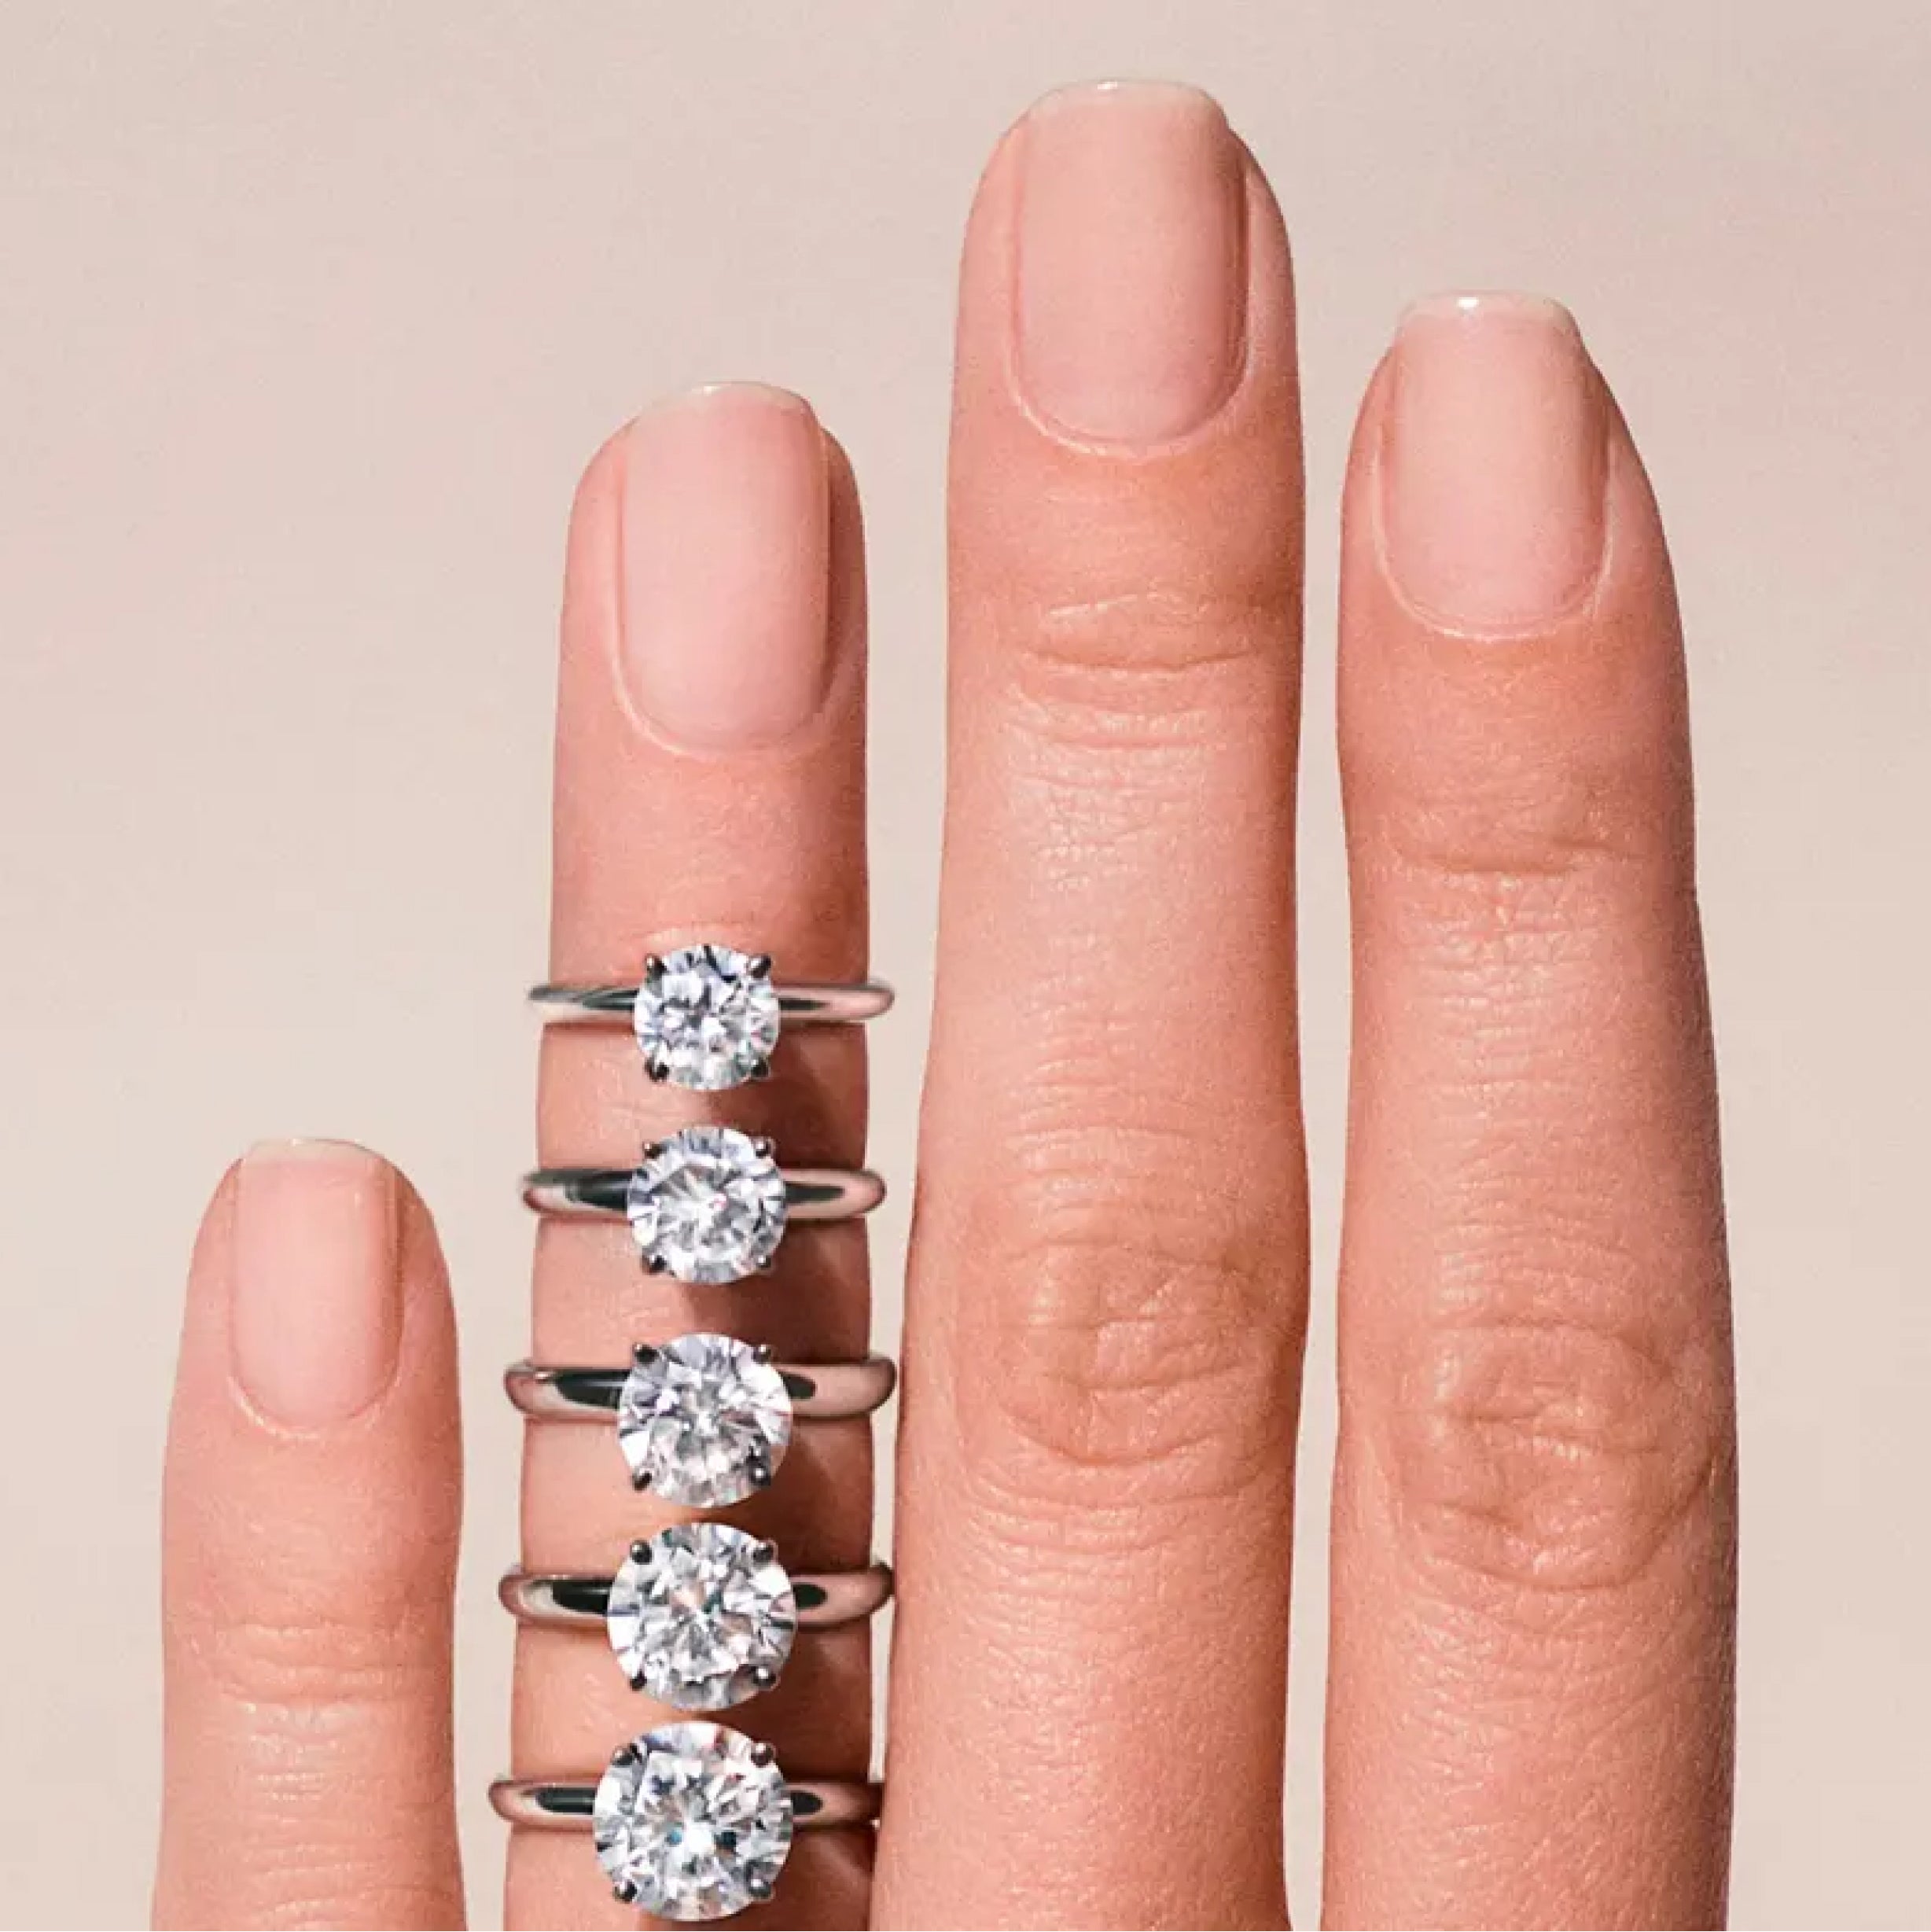 Someone's hand with 5 different sized diamond engagement rings on their ring finger.